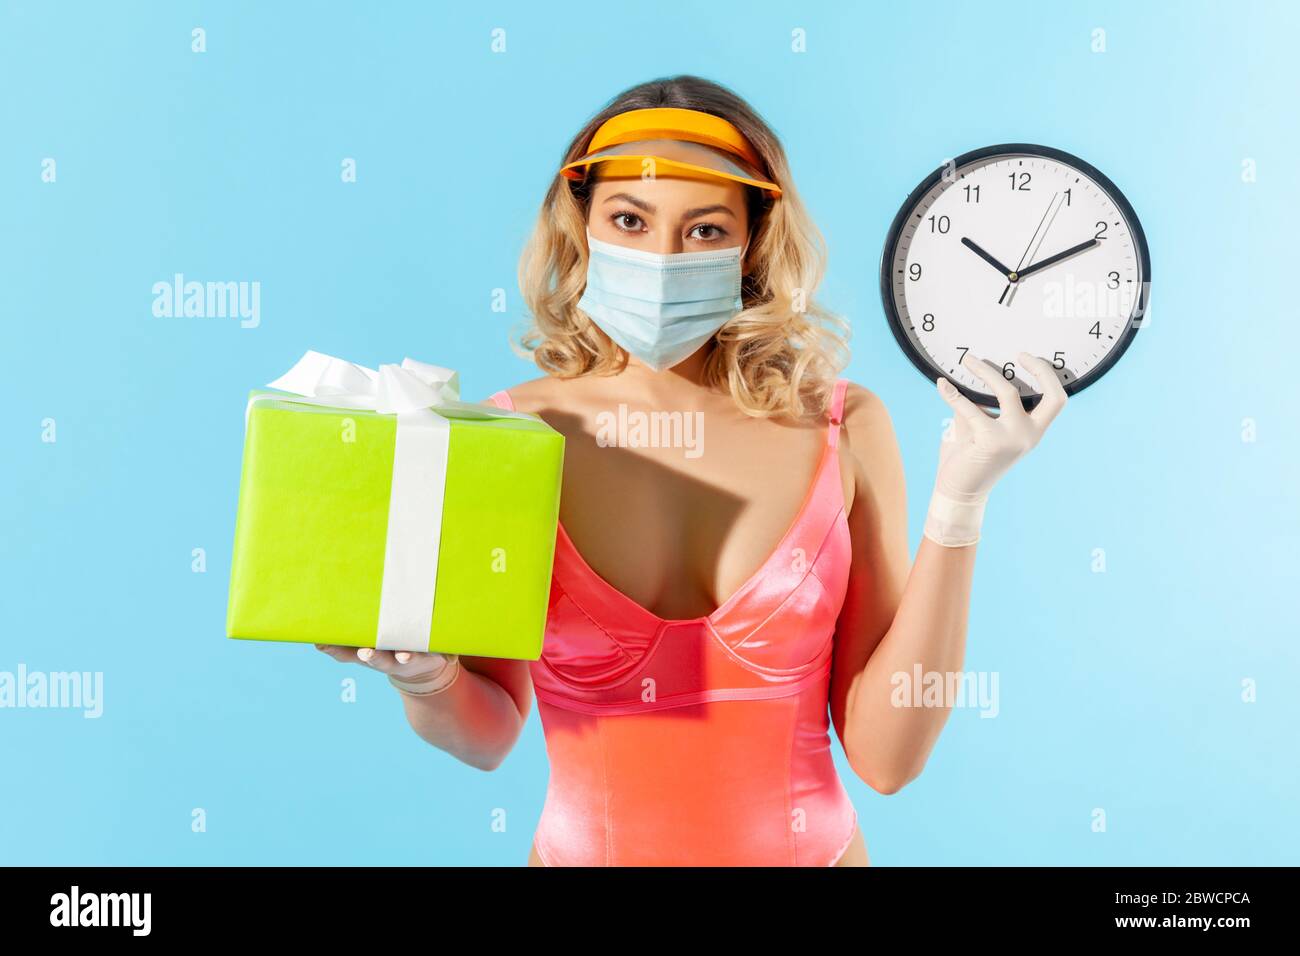 Birthday celebration, bonus in quarantine! Woman in swimsuit, hygienic face mask and protective gloves, holding gift box and big clock, safe summer ho Stock Photo